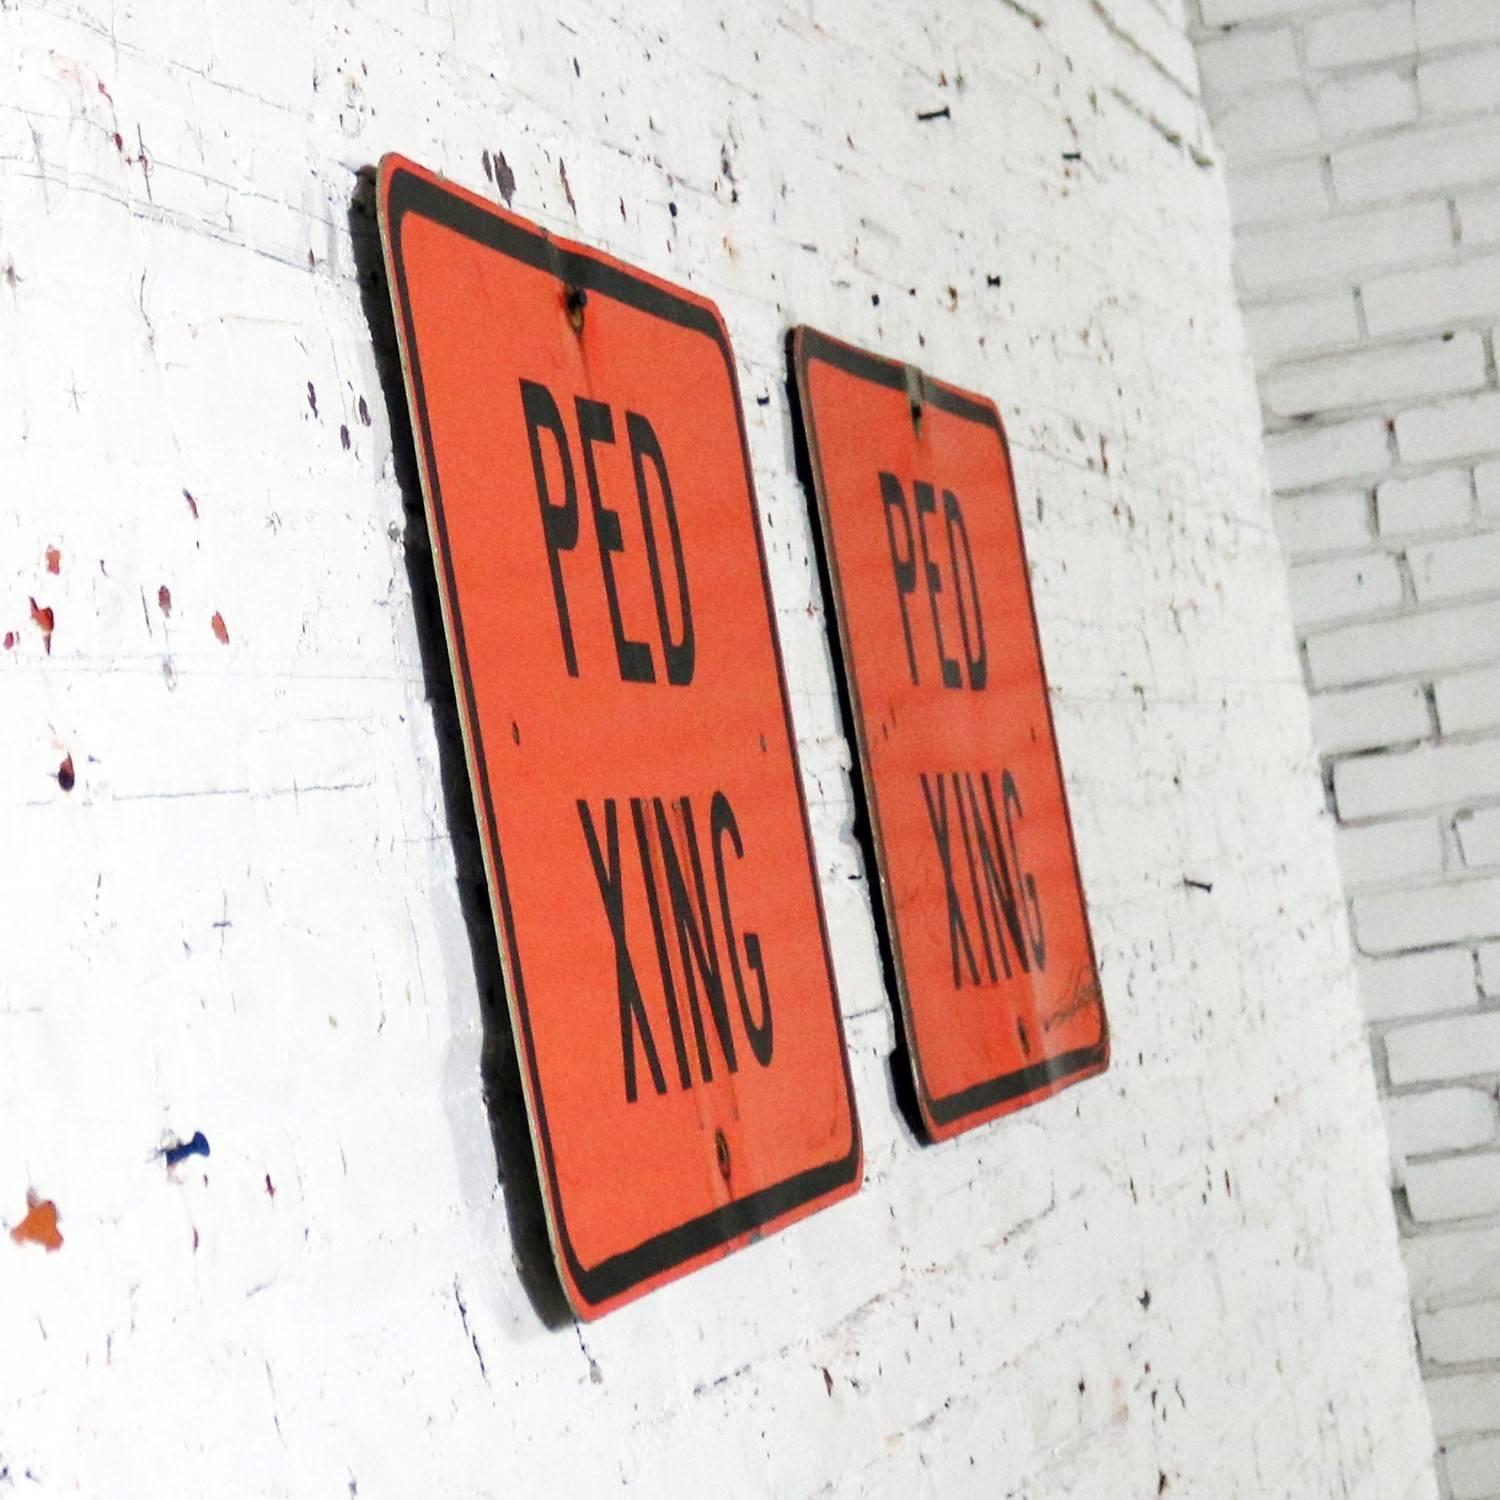 Vintage Ped Xing Florescent Orange Metal Traffic Signs In Good Condition For Sale In Topeka, KS